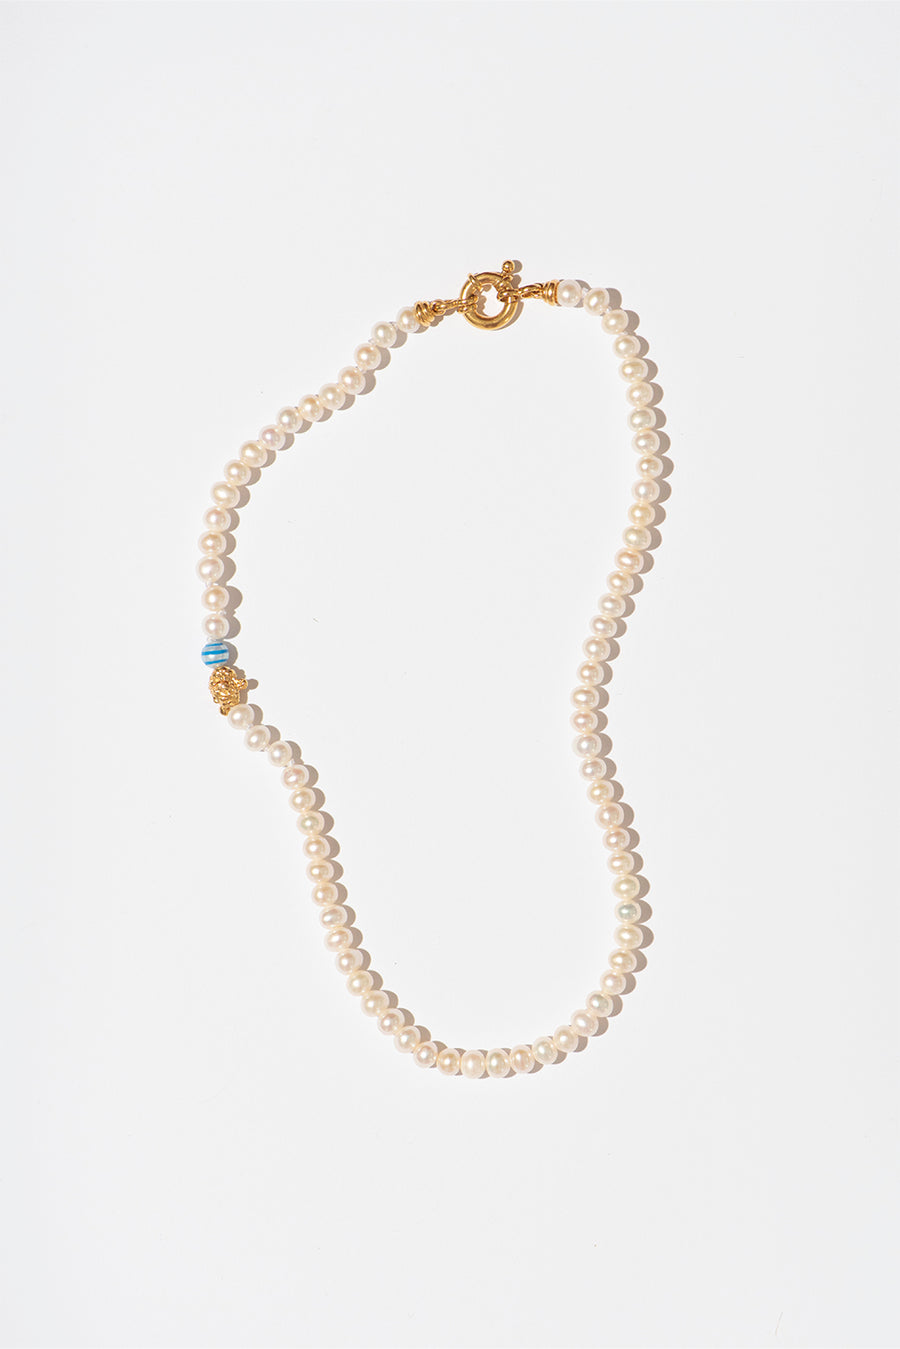 The Classic Pearl Necklace Blue Stripes - Small